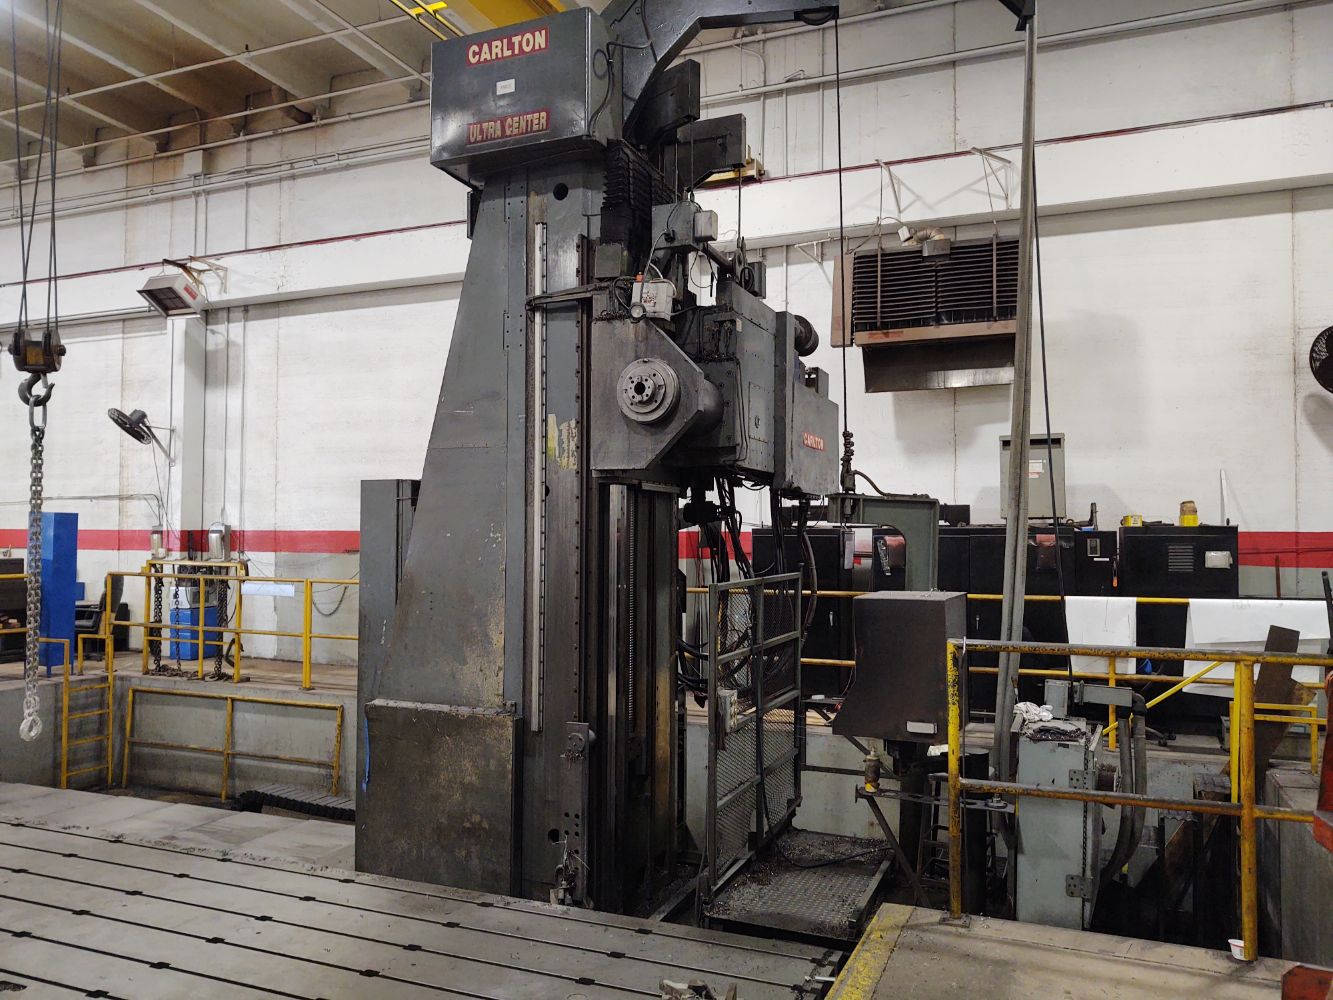 Surplus Metalworking Machinery to Ongoing Operations: Multi-Location Sale